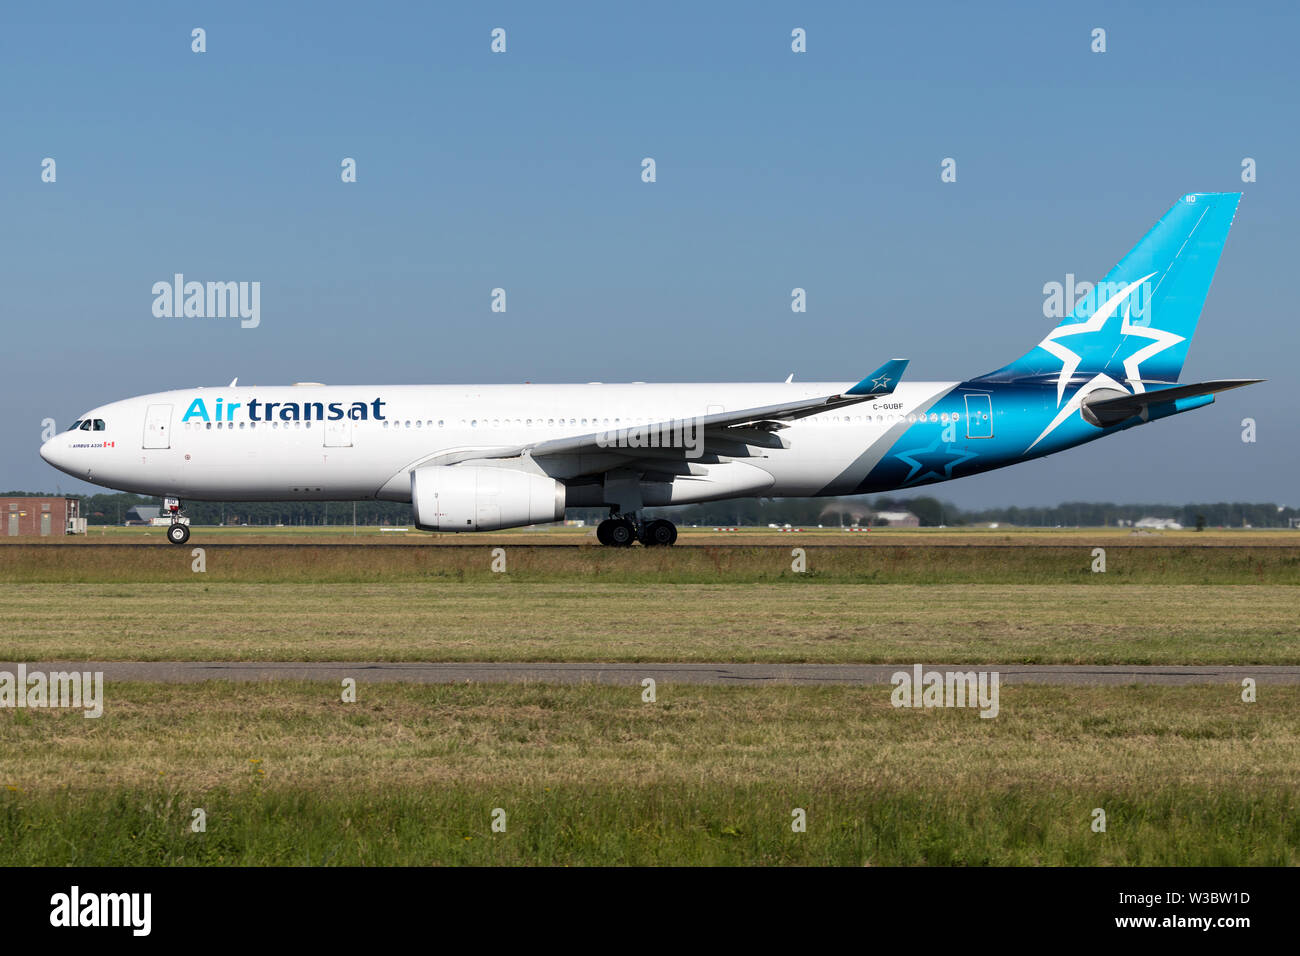 Canadian Air Transat Airbus A330-200 with registration C-GUBF on take off roll on runway 36L (Polderbaan) of Amsterdam Airport Schiphol. Stock Photo